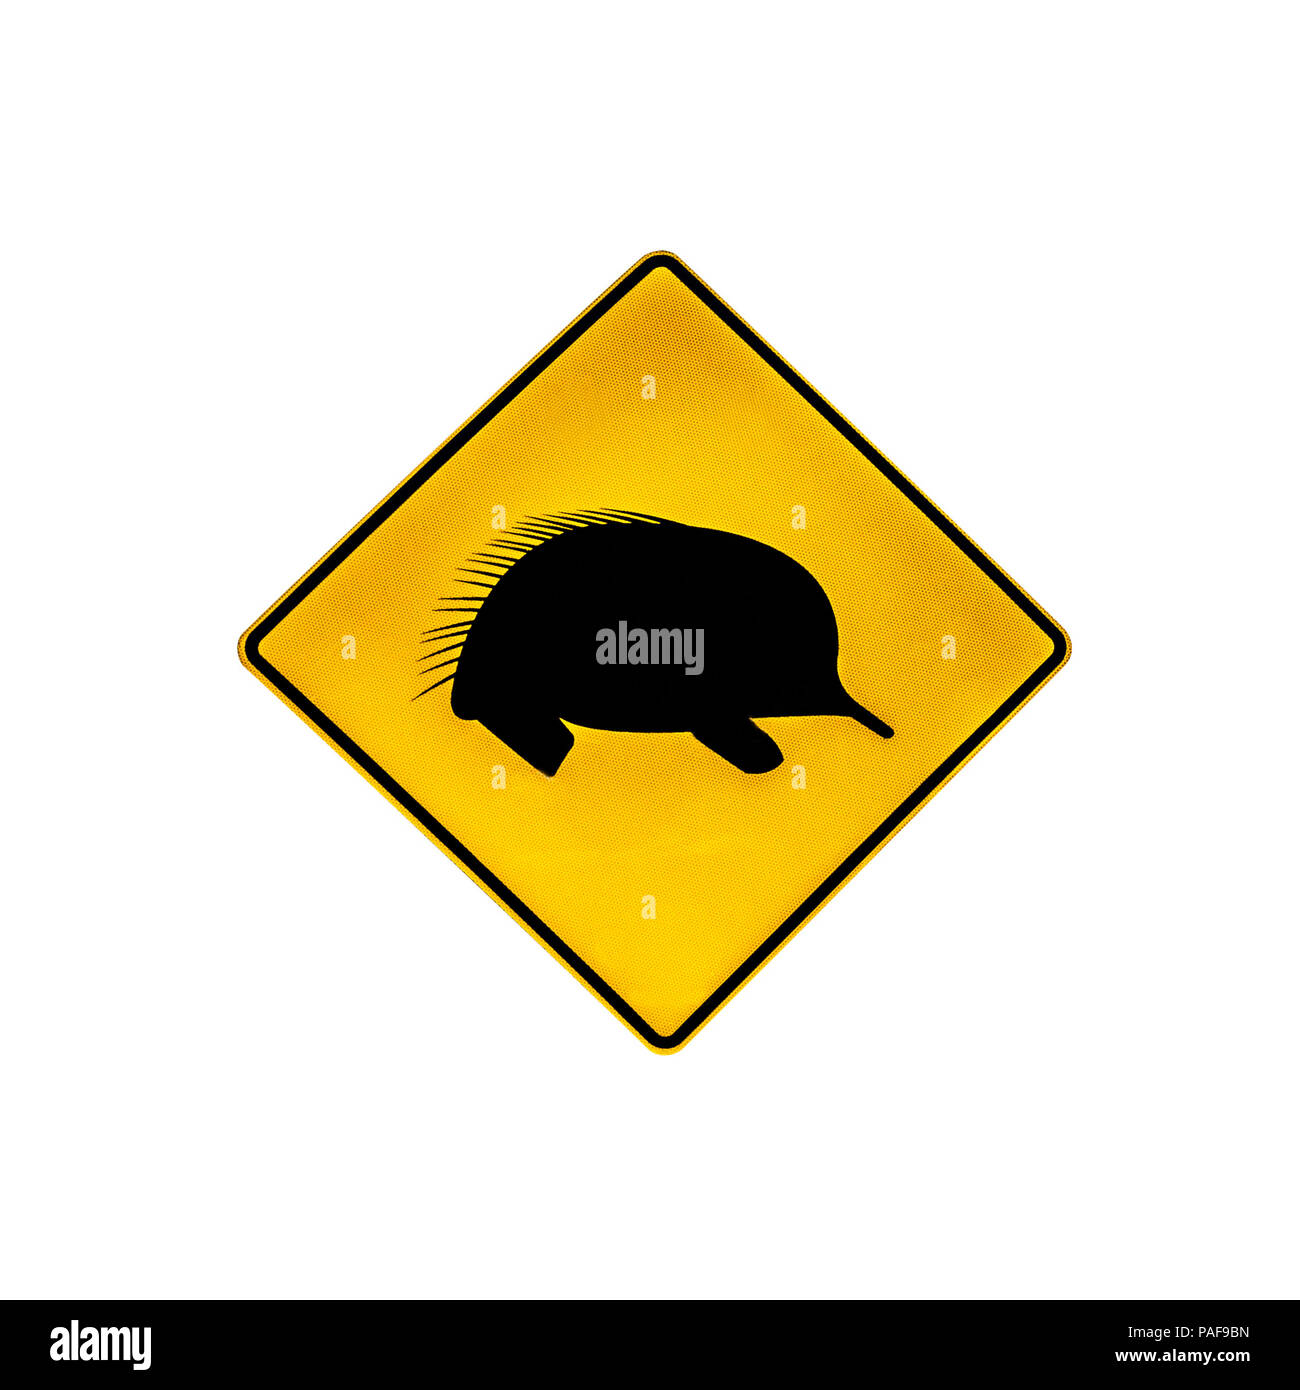 Australian warning road sign for echidnas wildlife crossing the road and highways of Australia. Isolated on white. Stock Photo